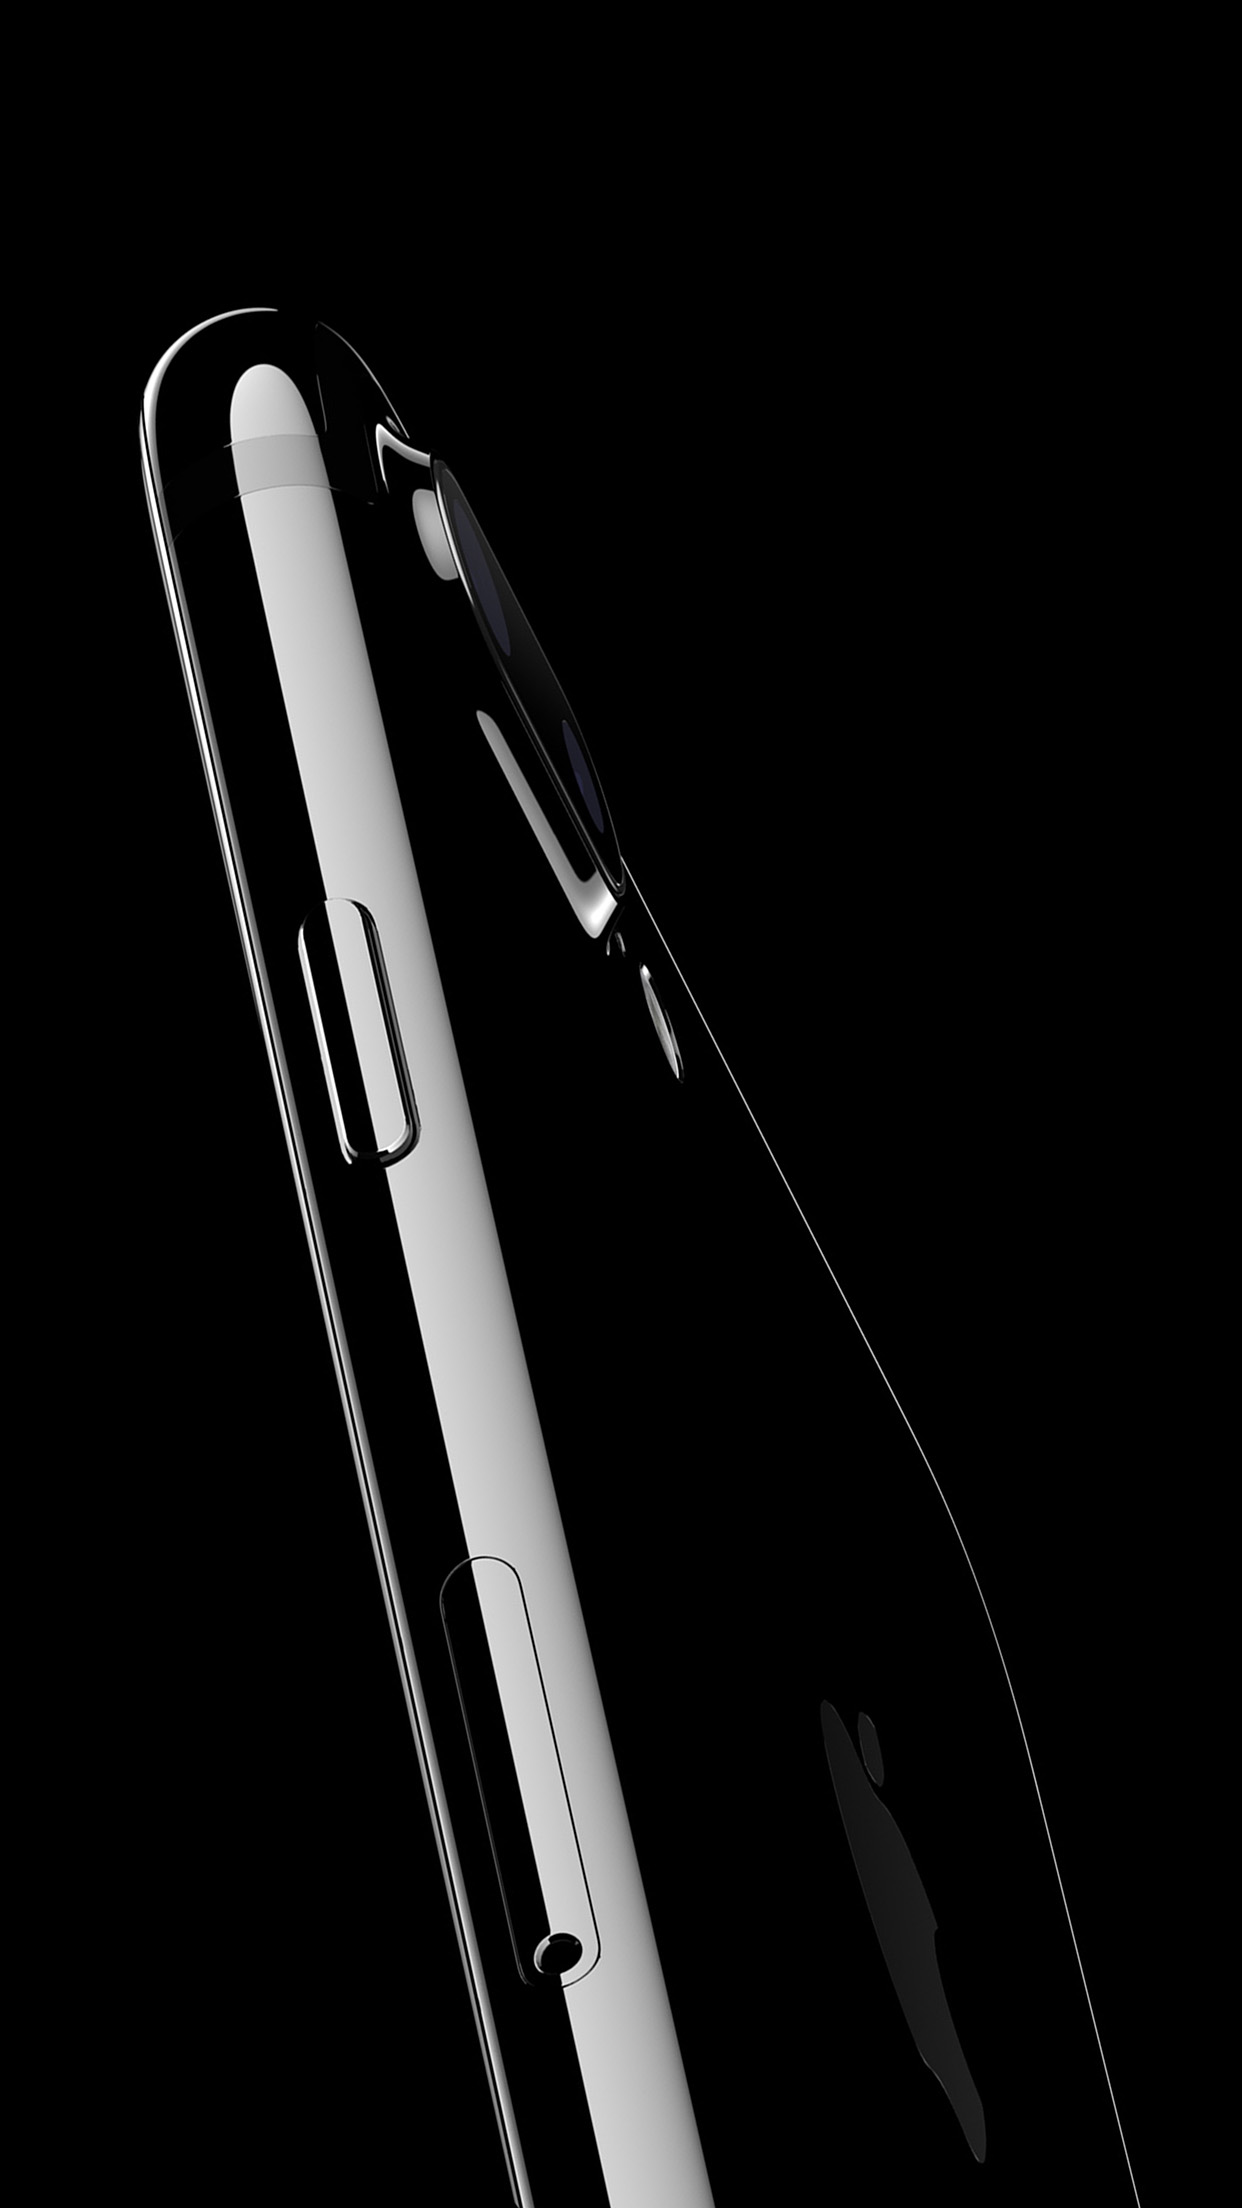 jet black wallpaper,photography,gadget,material property,black and white,technology